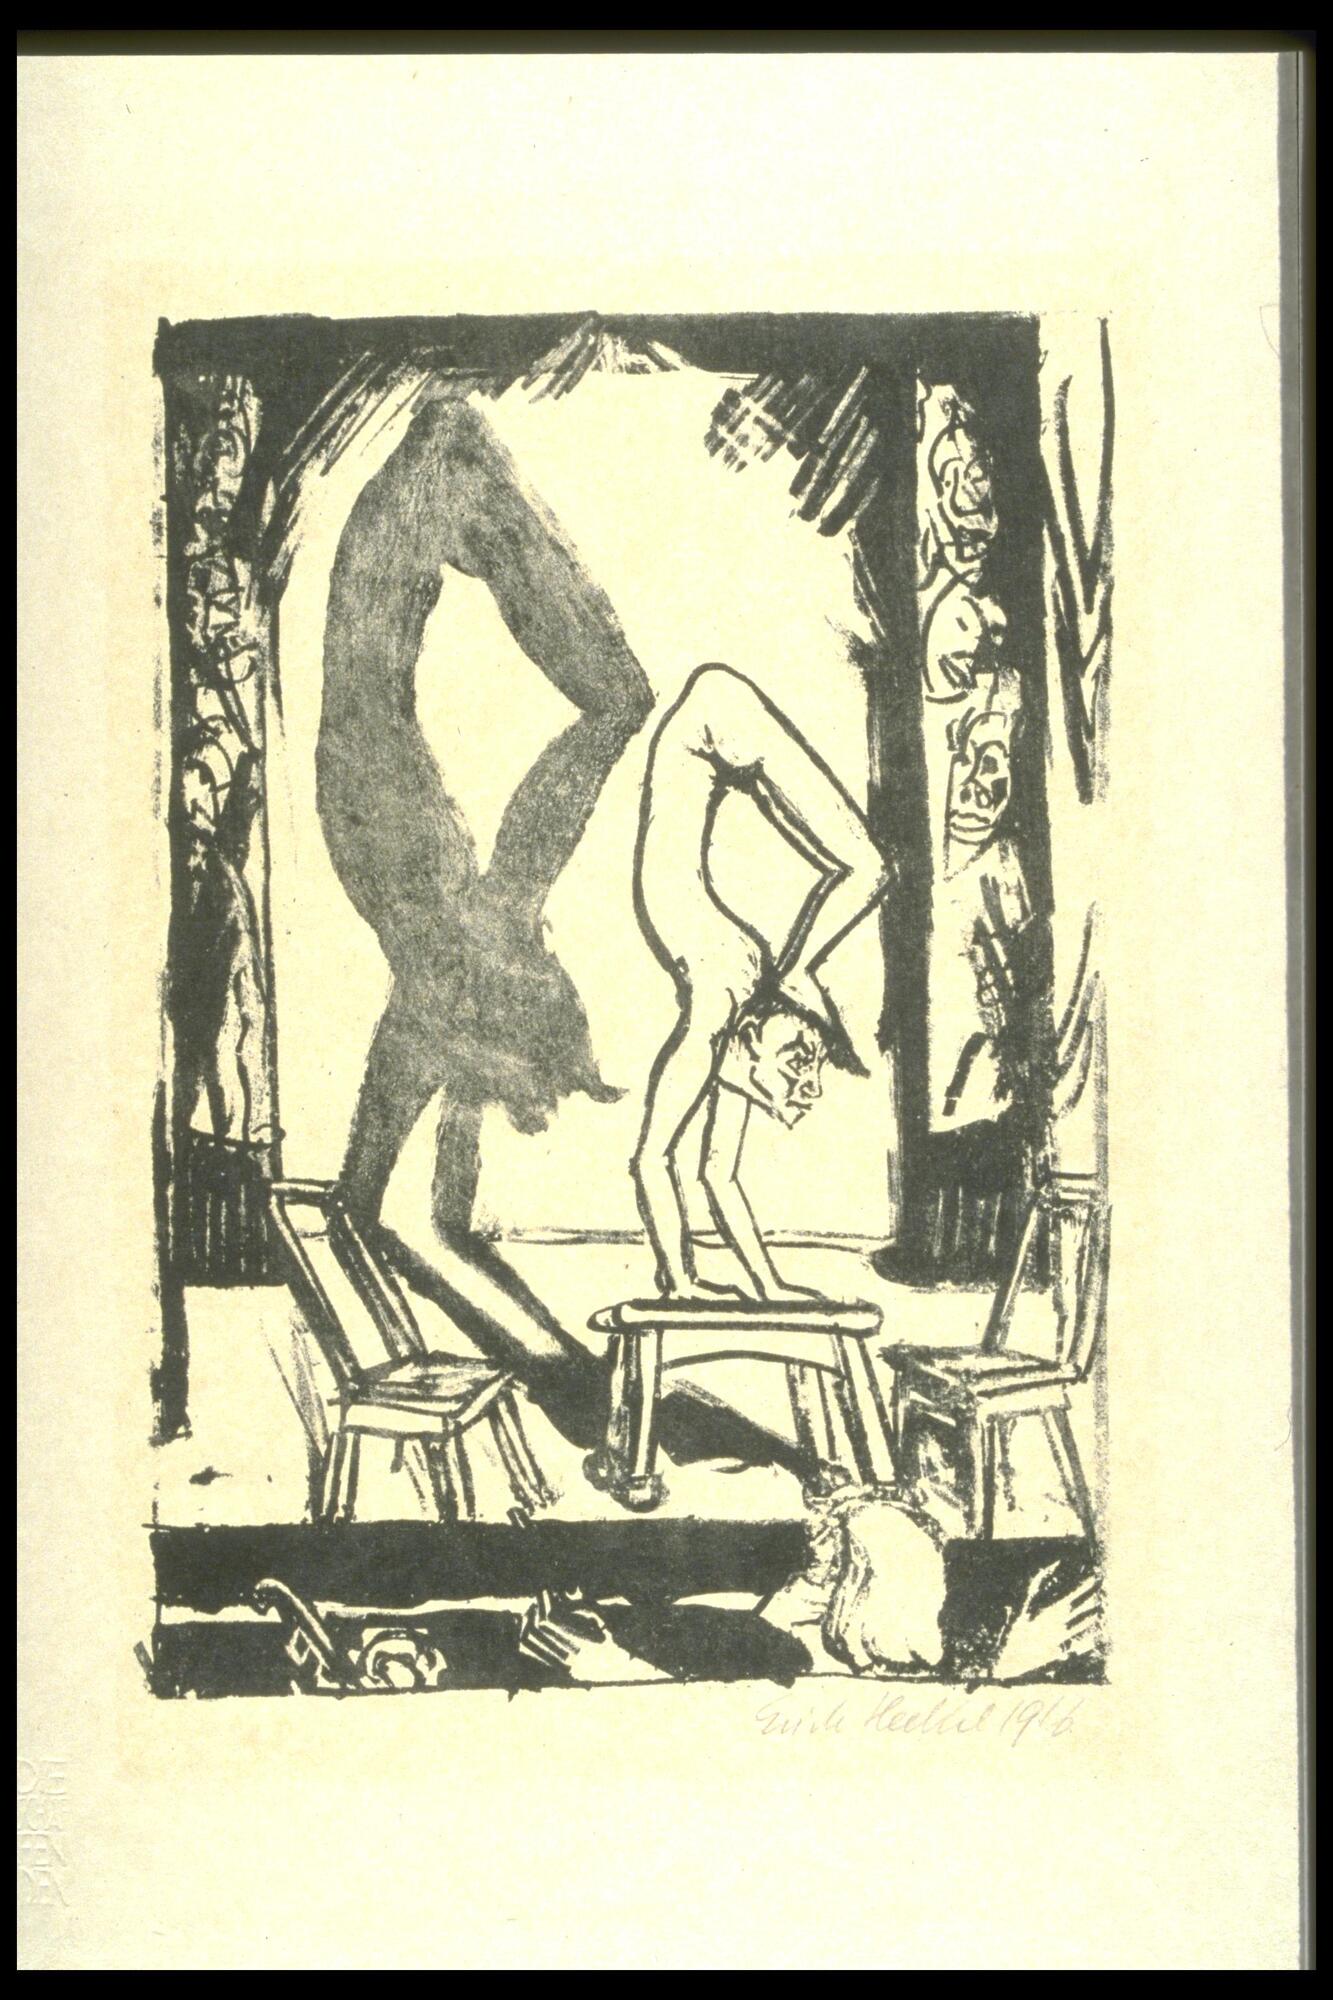 Print featuring a stage with a figure of a man with his feet touching his head while doing a handstand on a small table flanked by two chairs.  His large shadow is cast on the wall behind him.  The head and hands of a conductor are visible in the lower right.